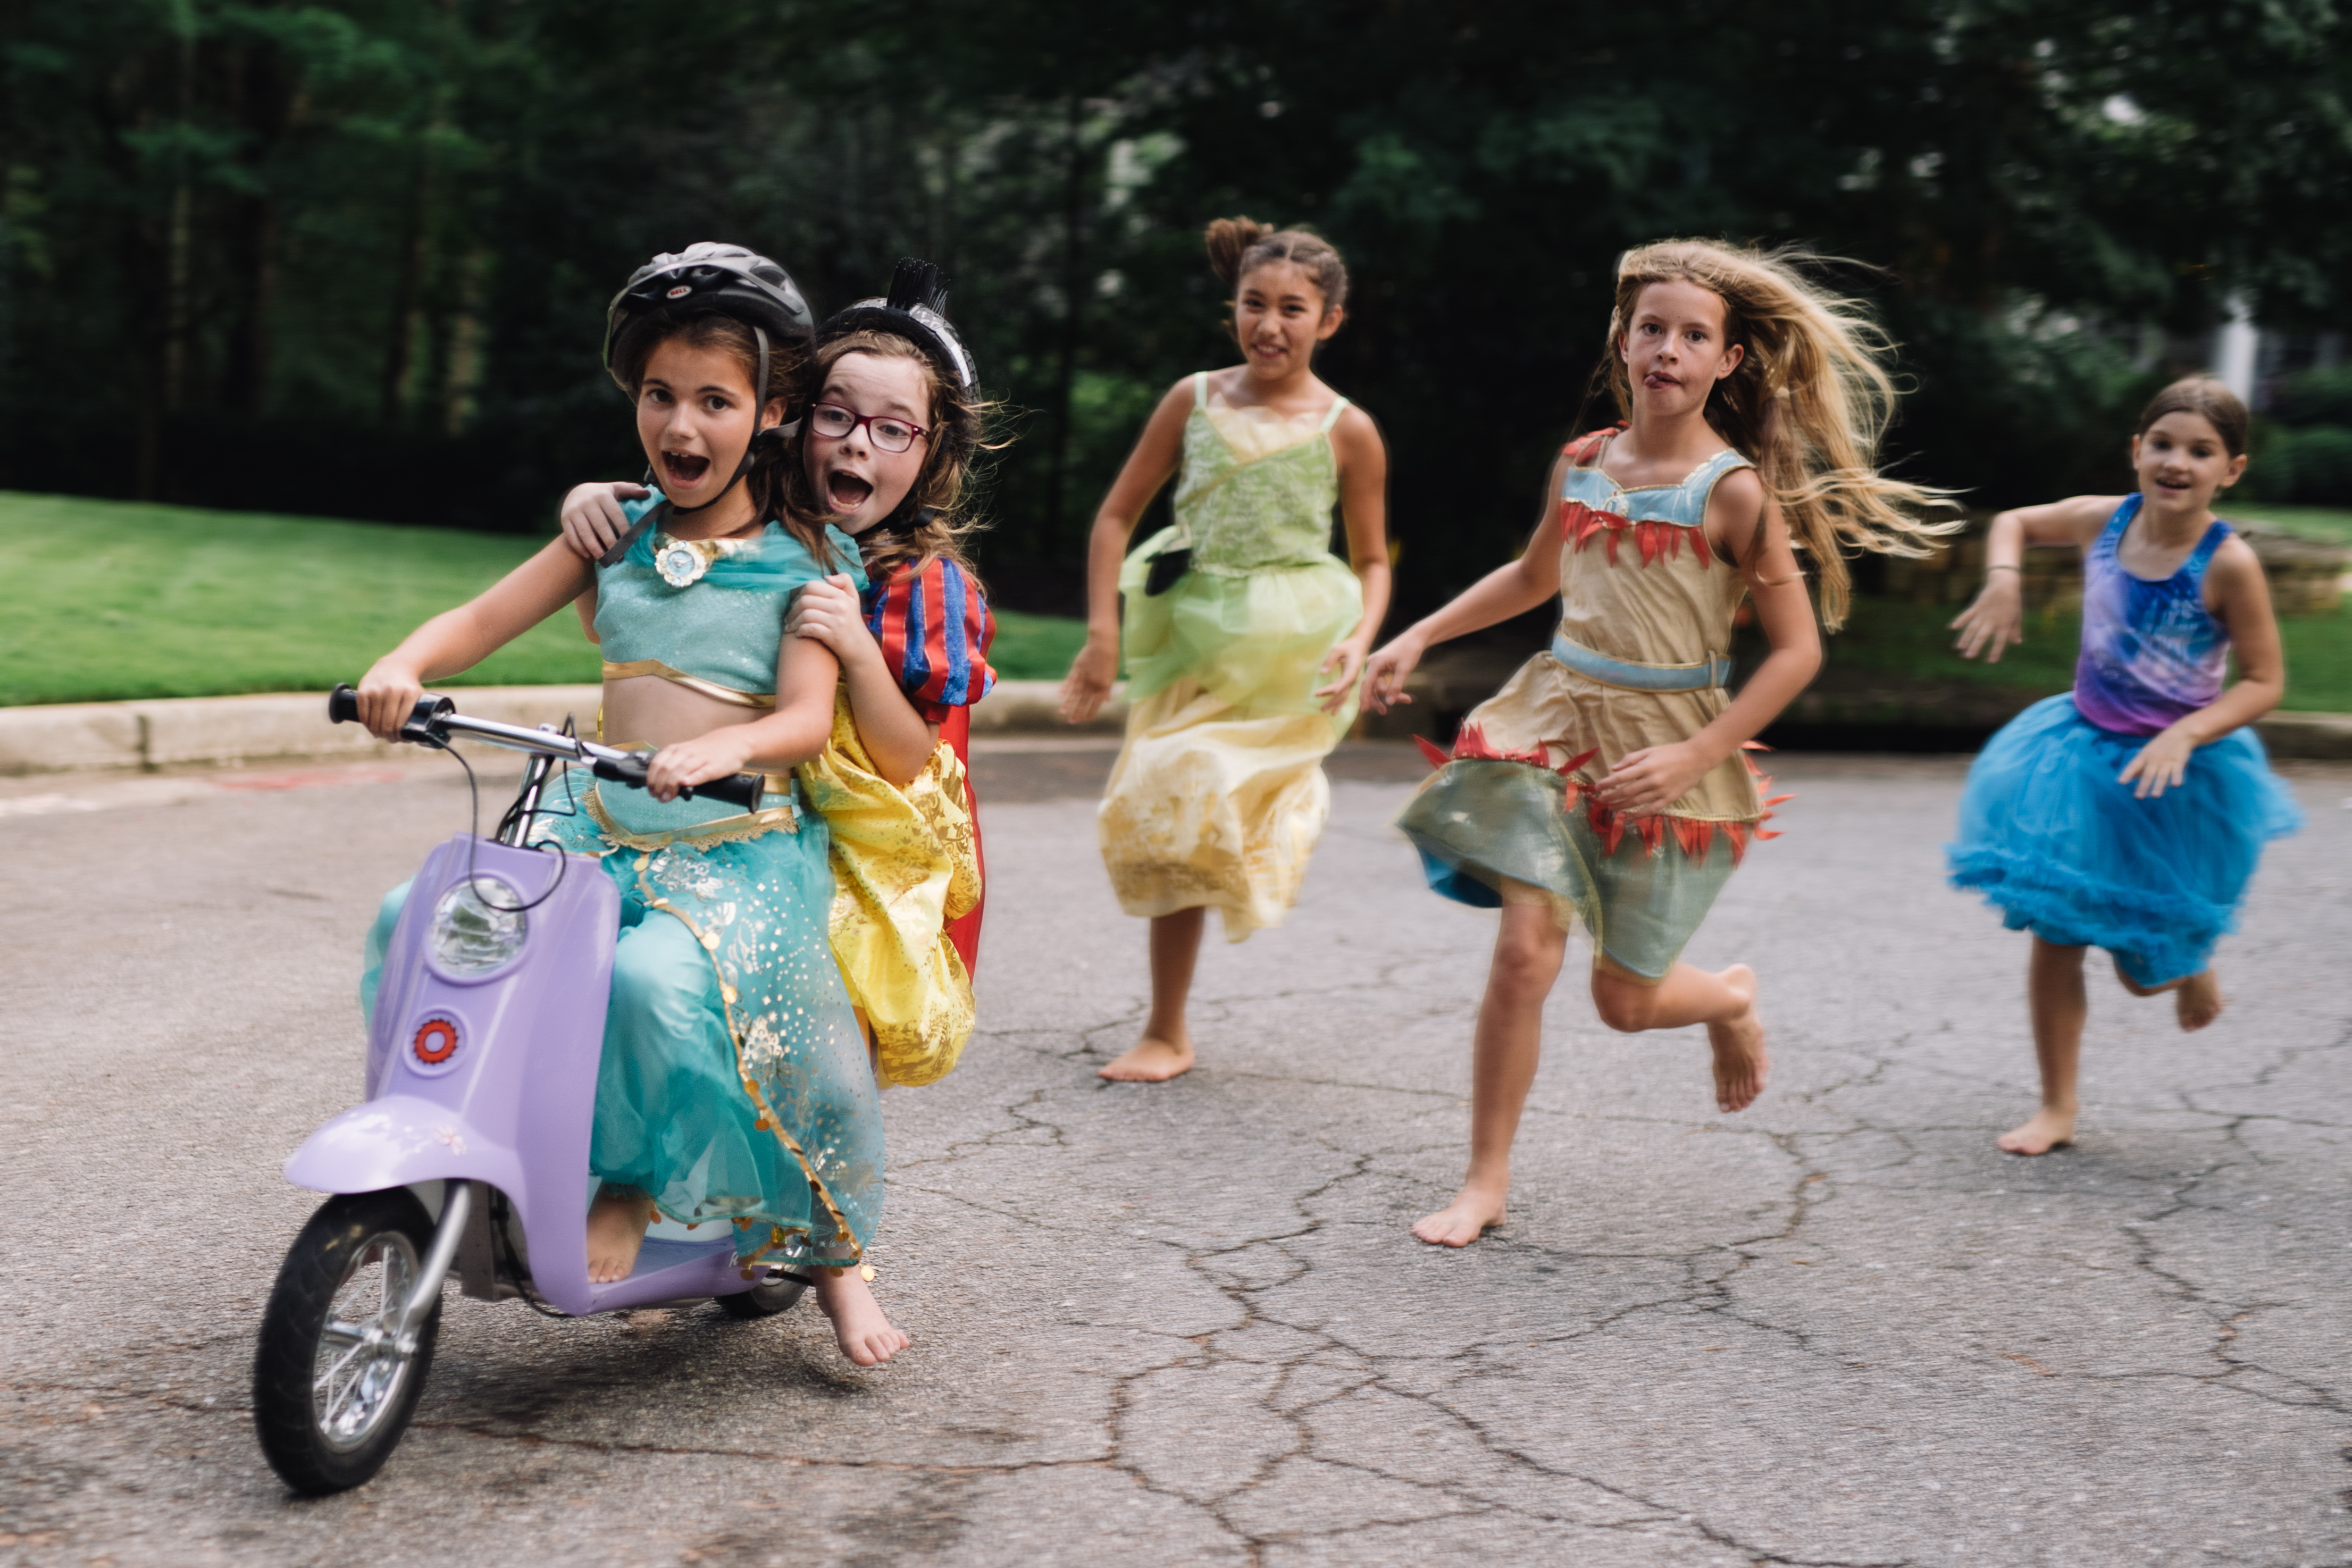 DISNEY DEBUTS #DREAMBIGPRINCESS PHOTOGRAPHY CAMPAIGN TO ENCOURAGE KIDS AROUND THE GLOBE TO DREAM BIG